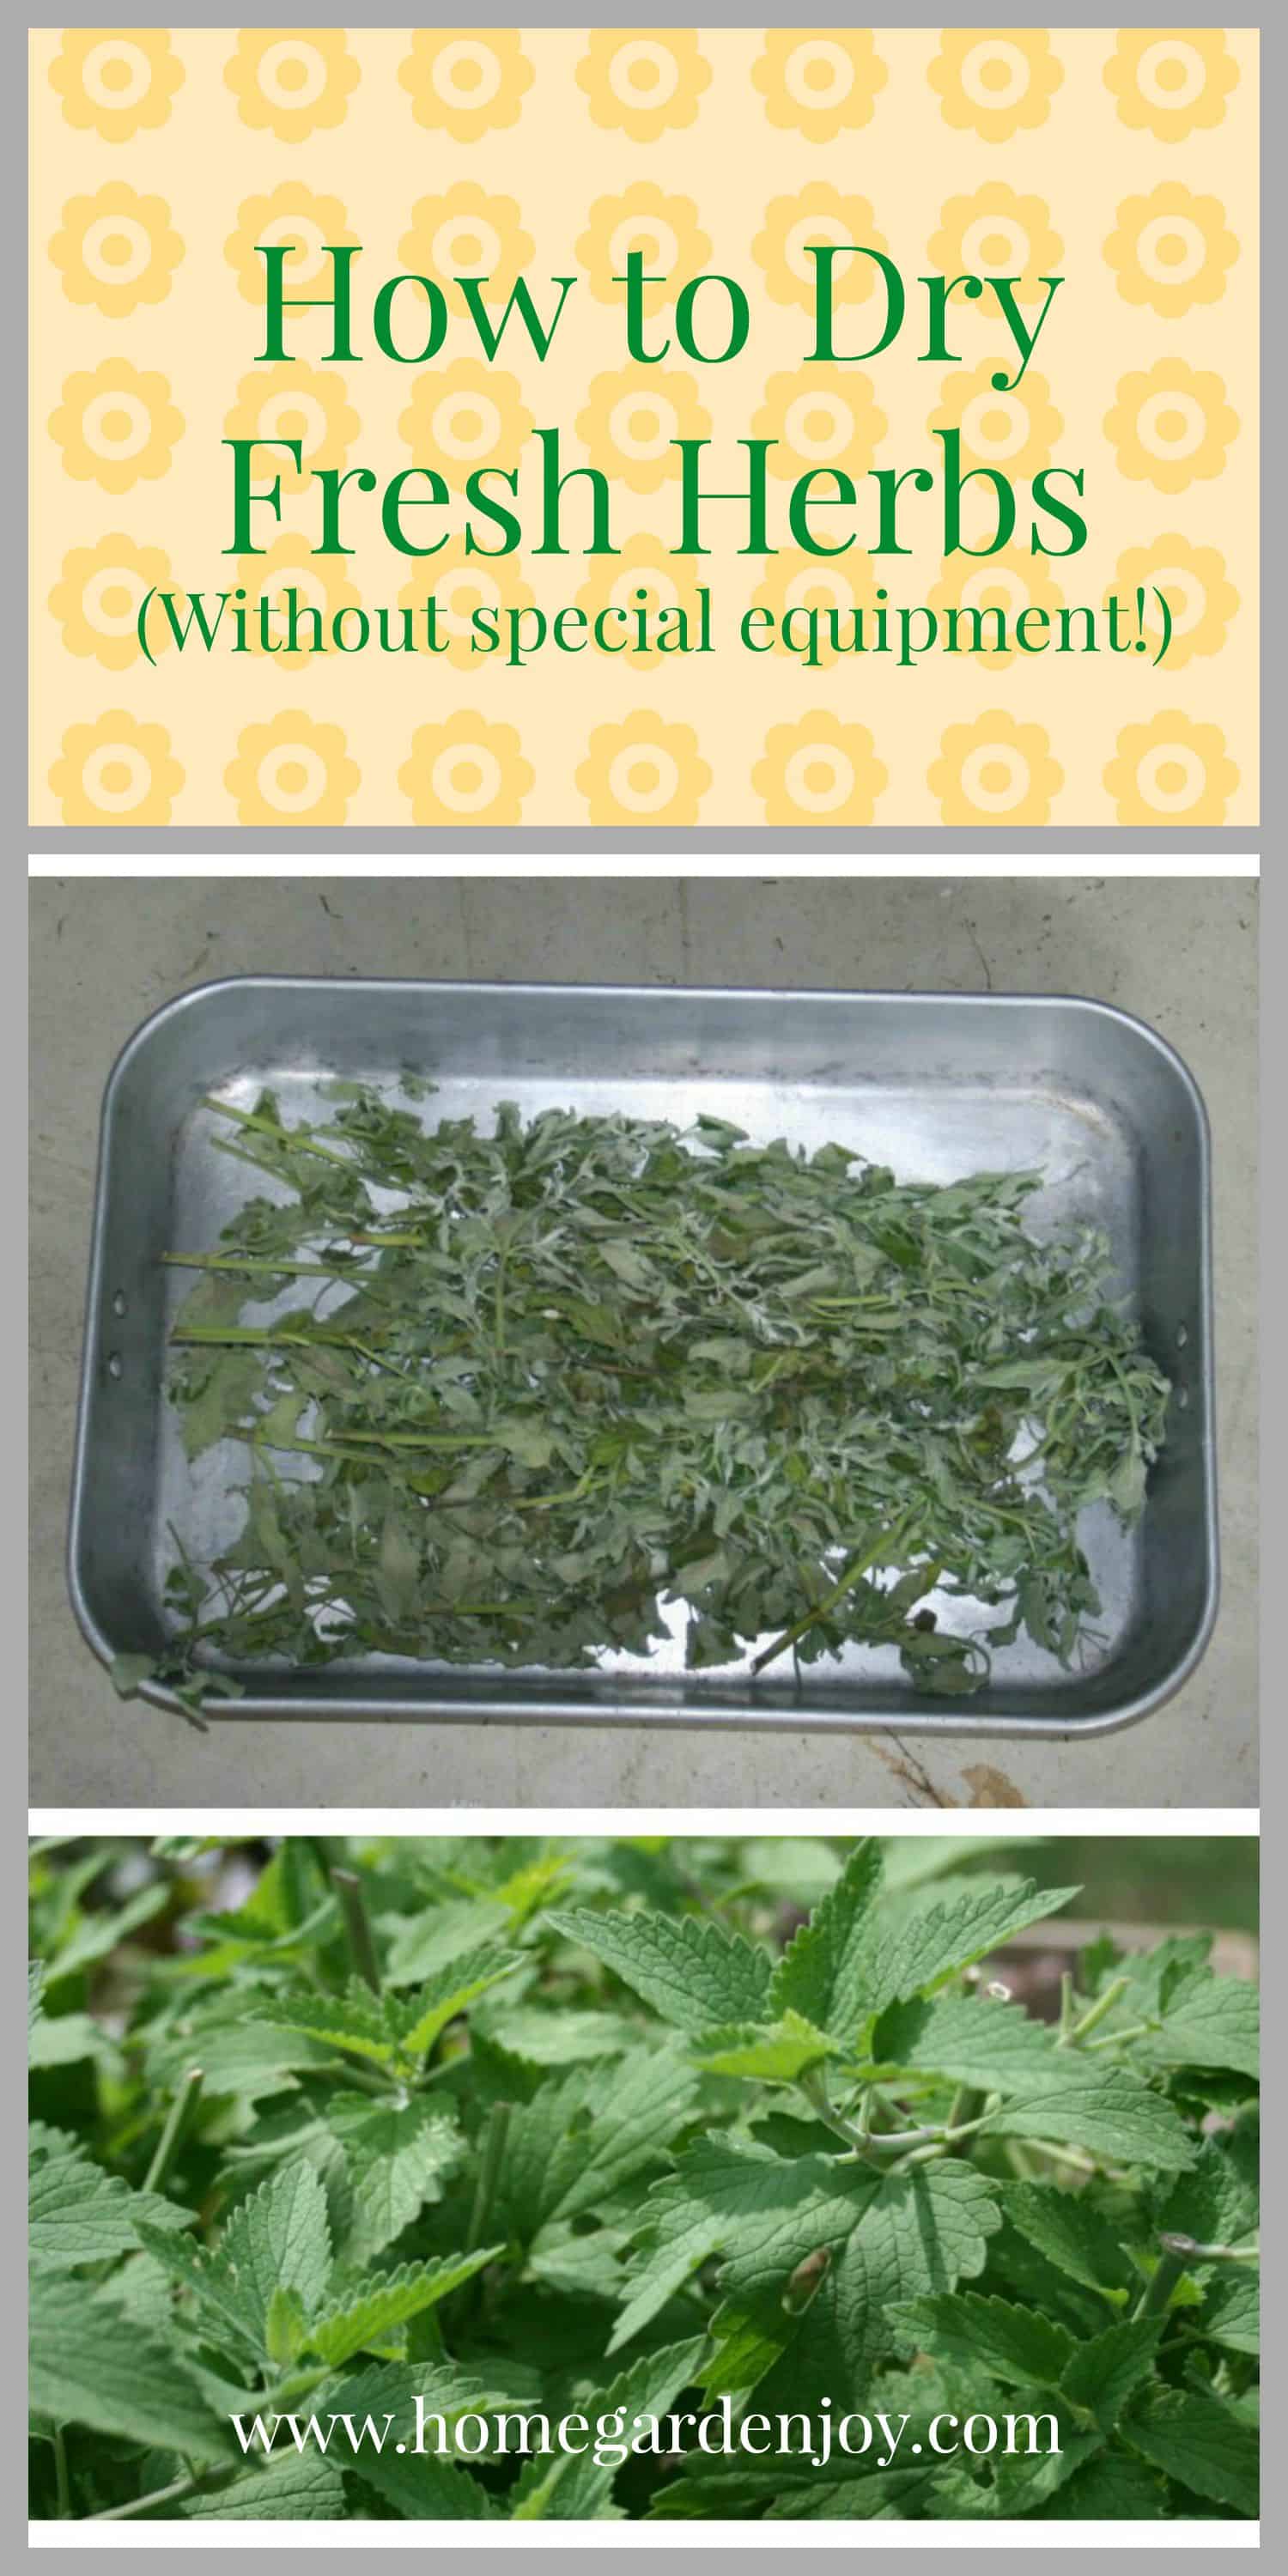 How to Dry Fresh Herbs